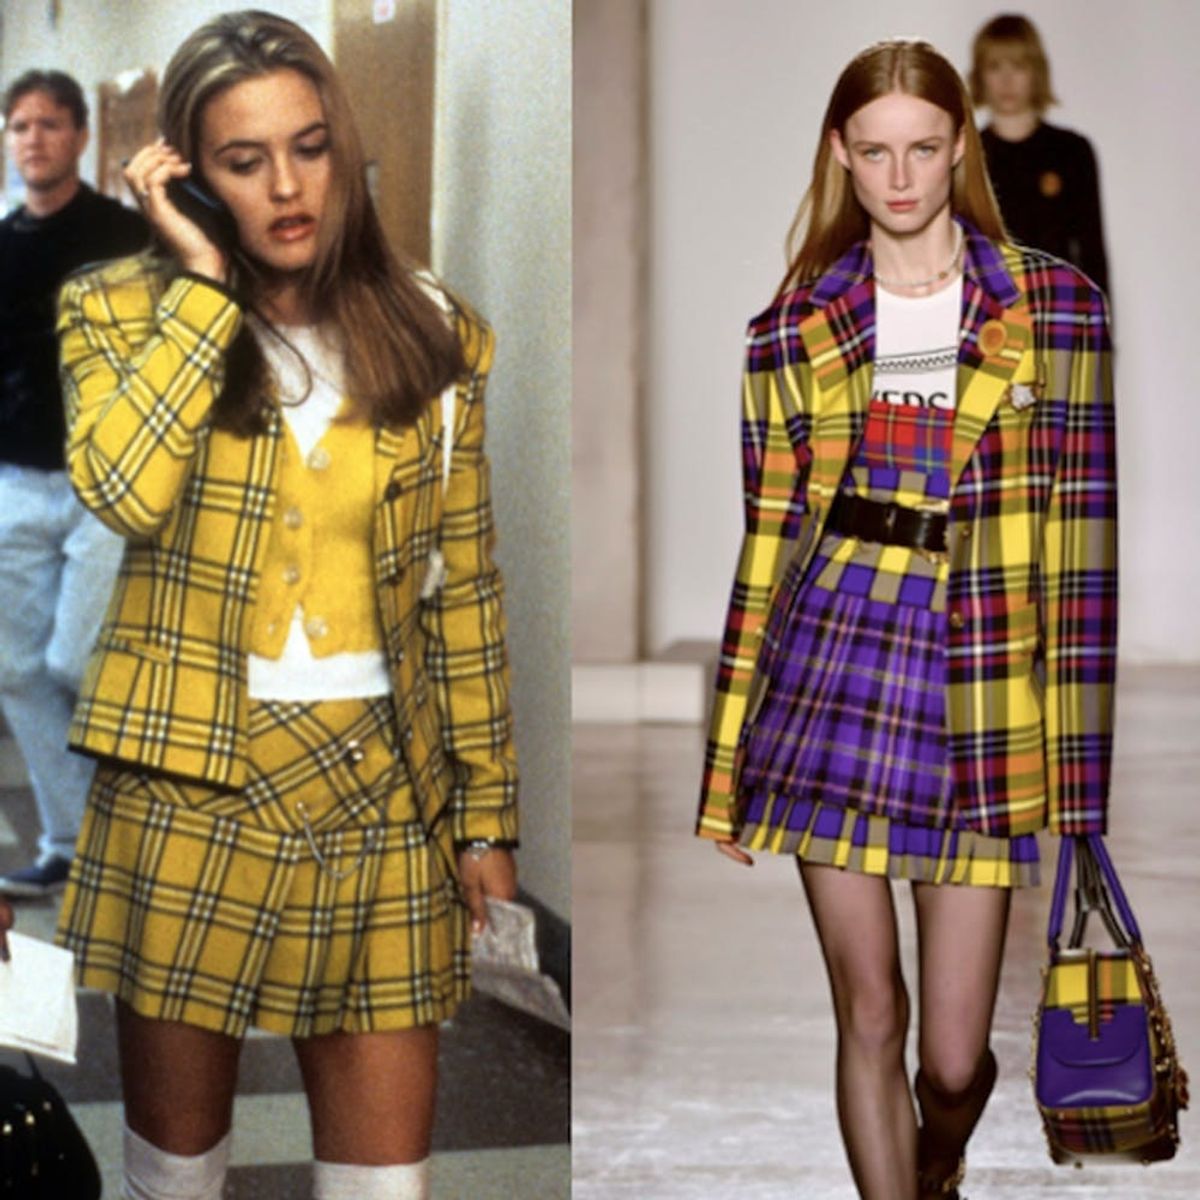 ‘Clueless’ Style Is the 2018 Fashion Trend You Never Saw Coming